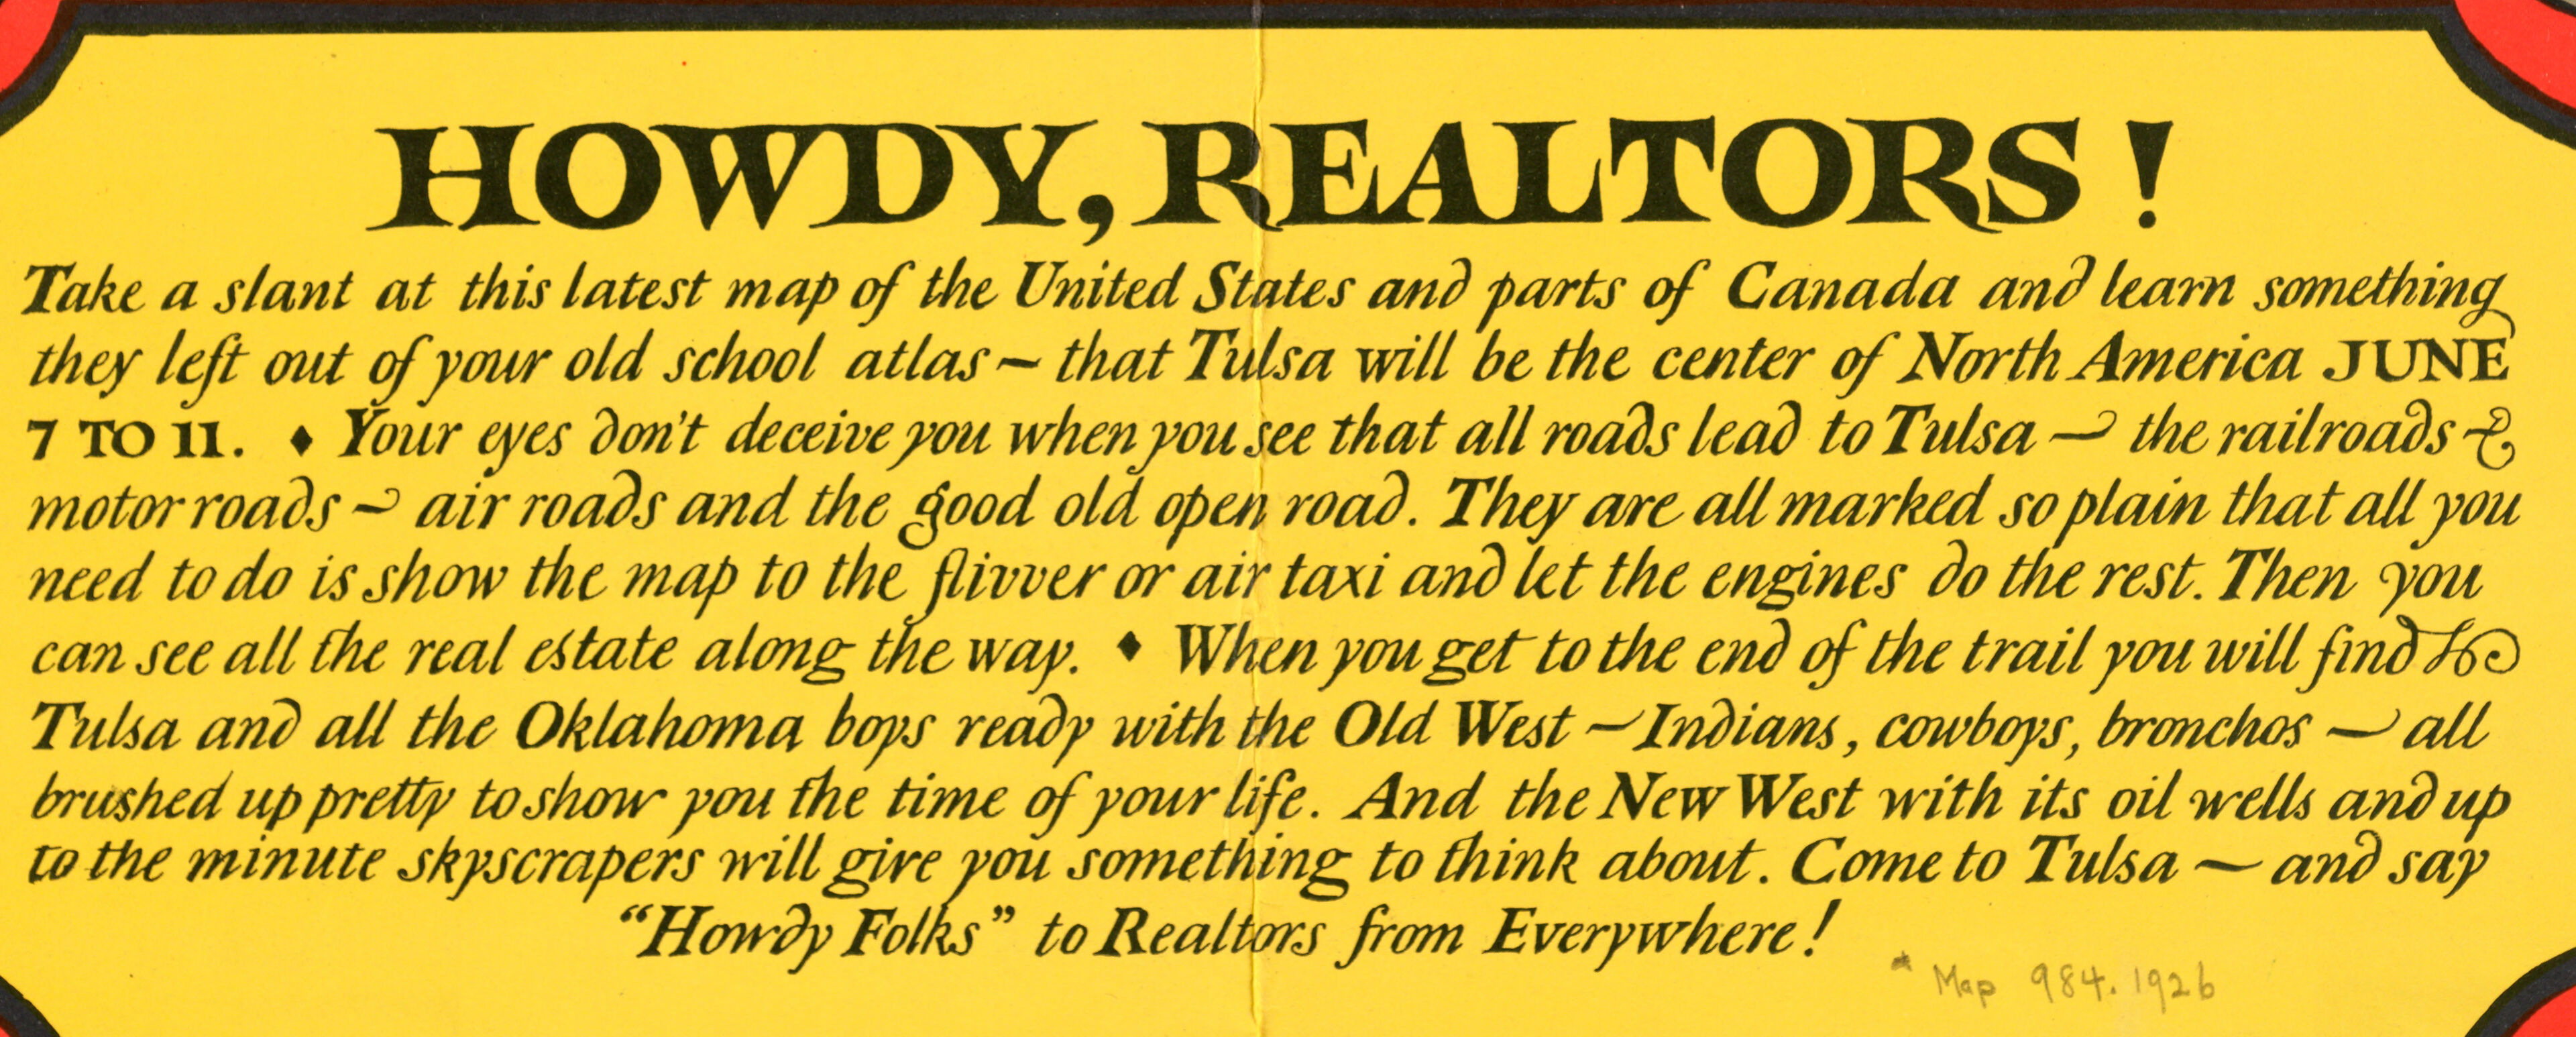 &lsquo;Howdy, Realtors!' A message explaining in greater detail how all roads lead to Tulsa.